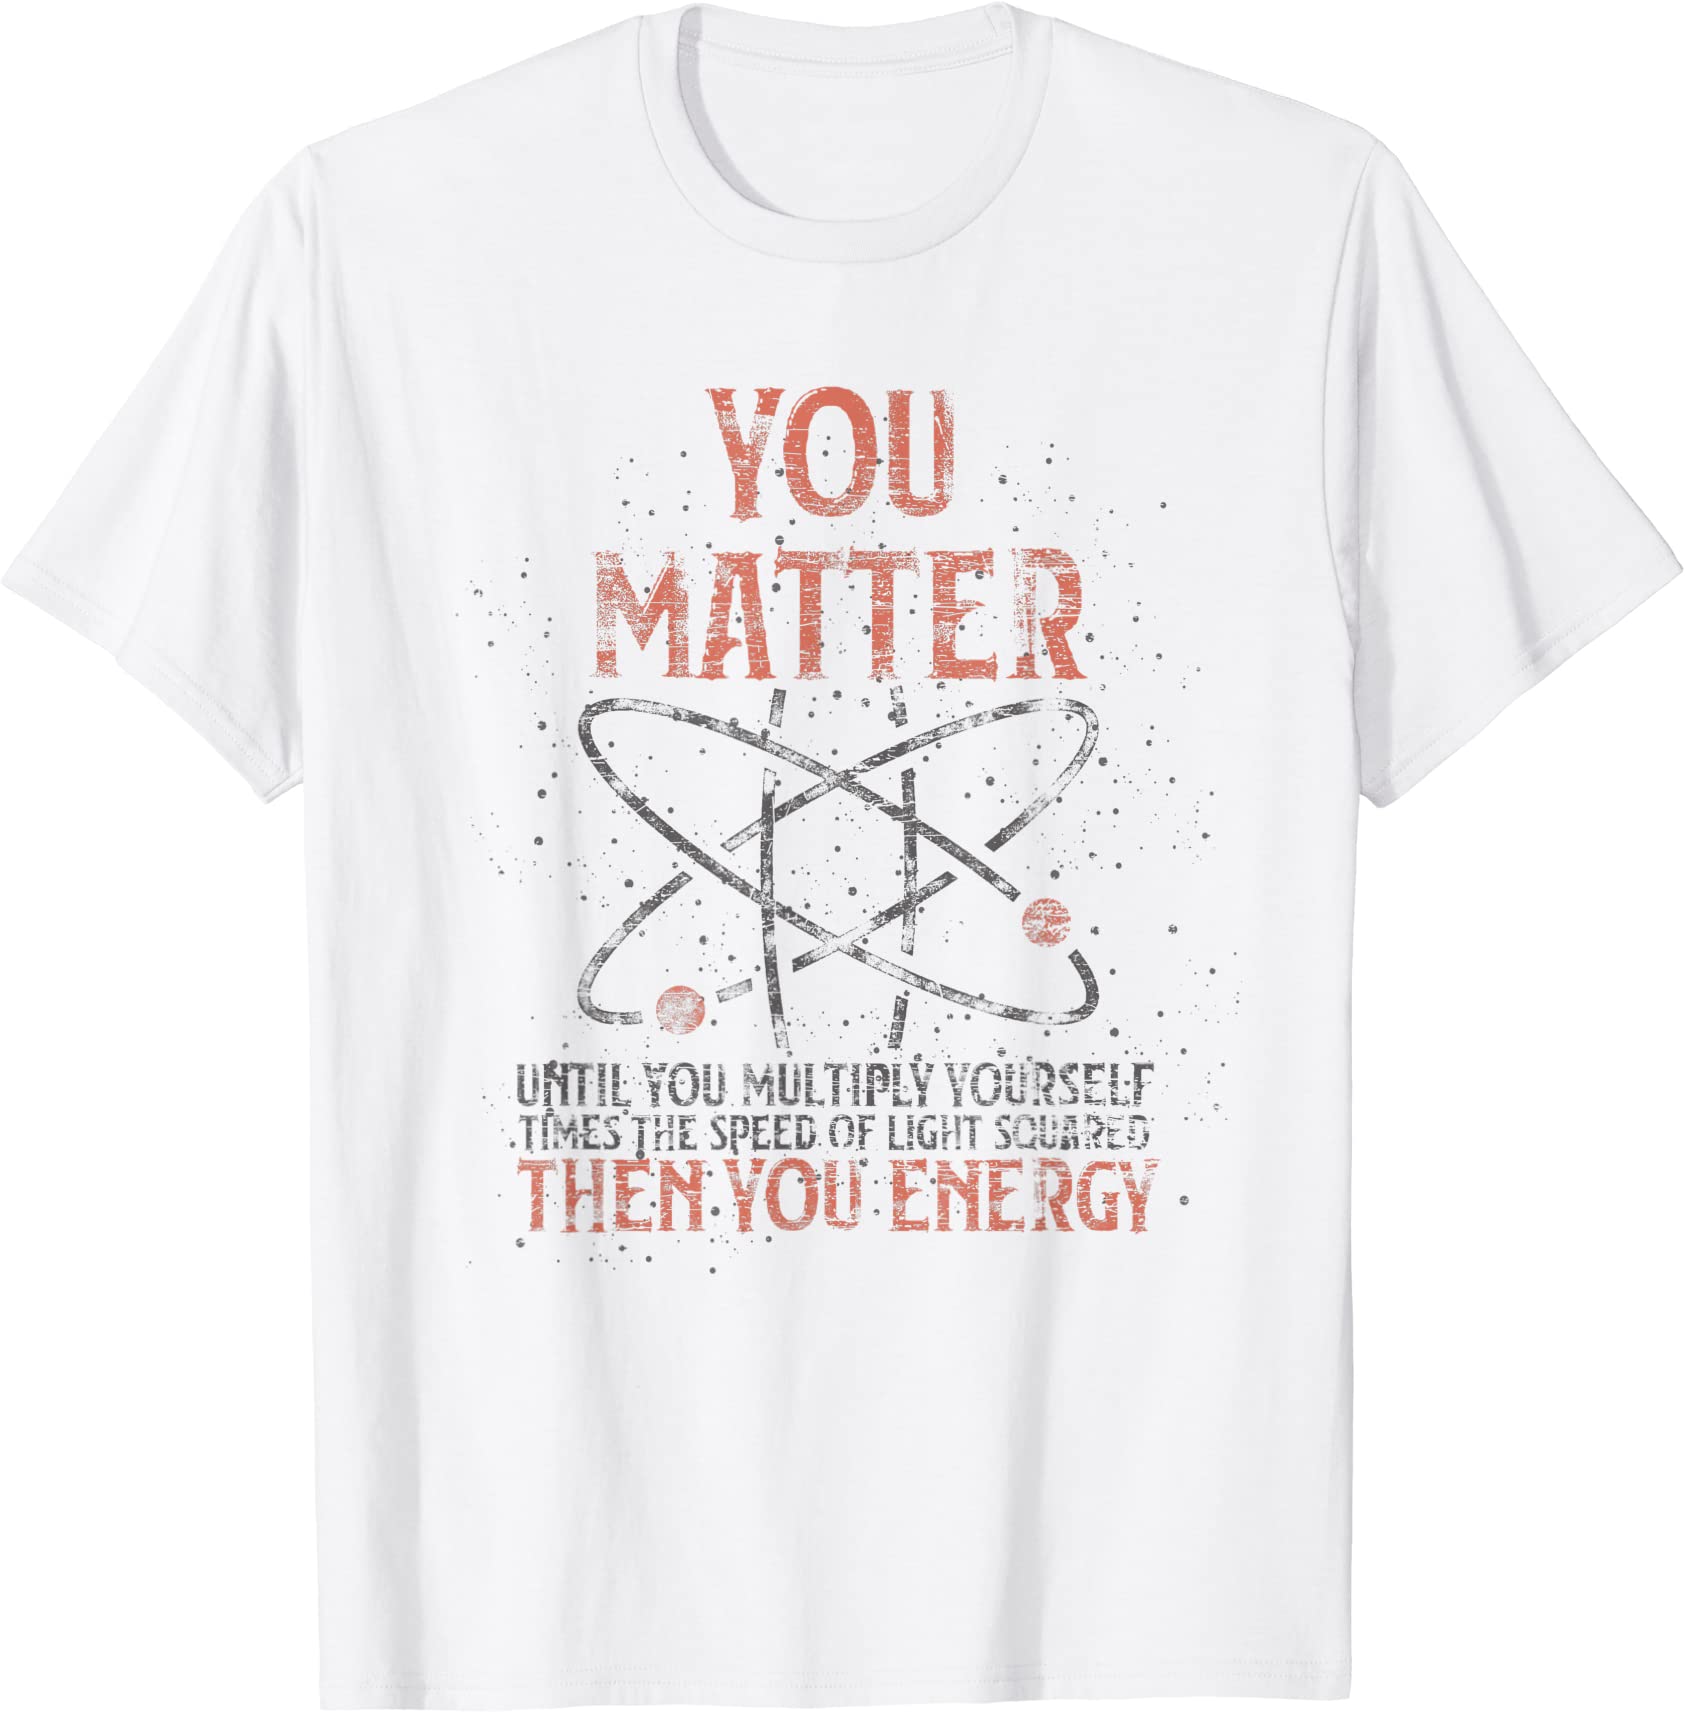 you matter until you multiply yourself funny science physics t shirt ...